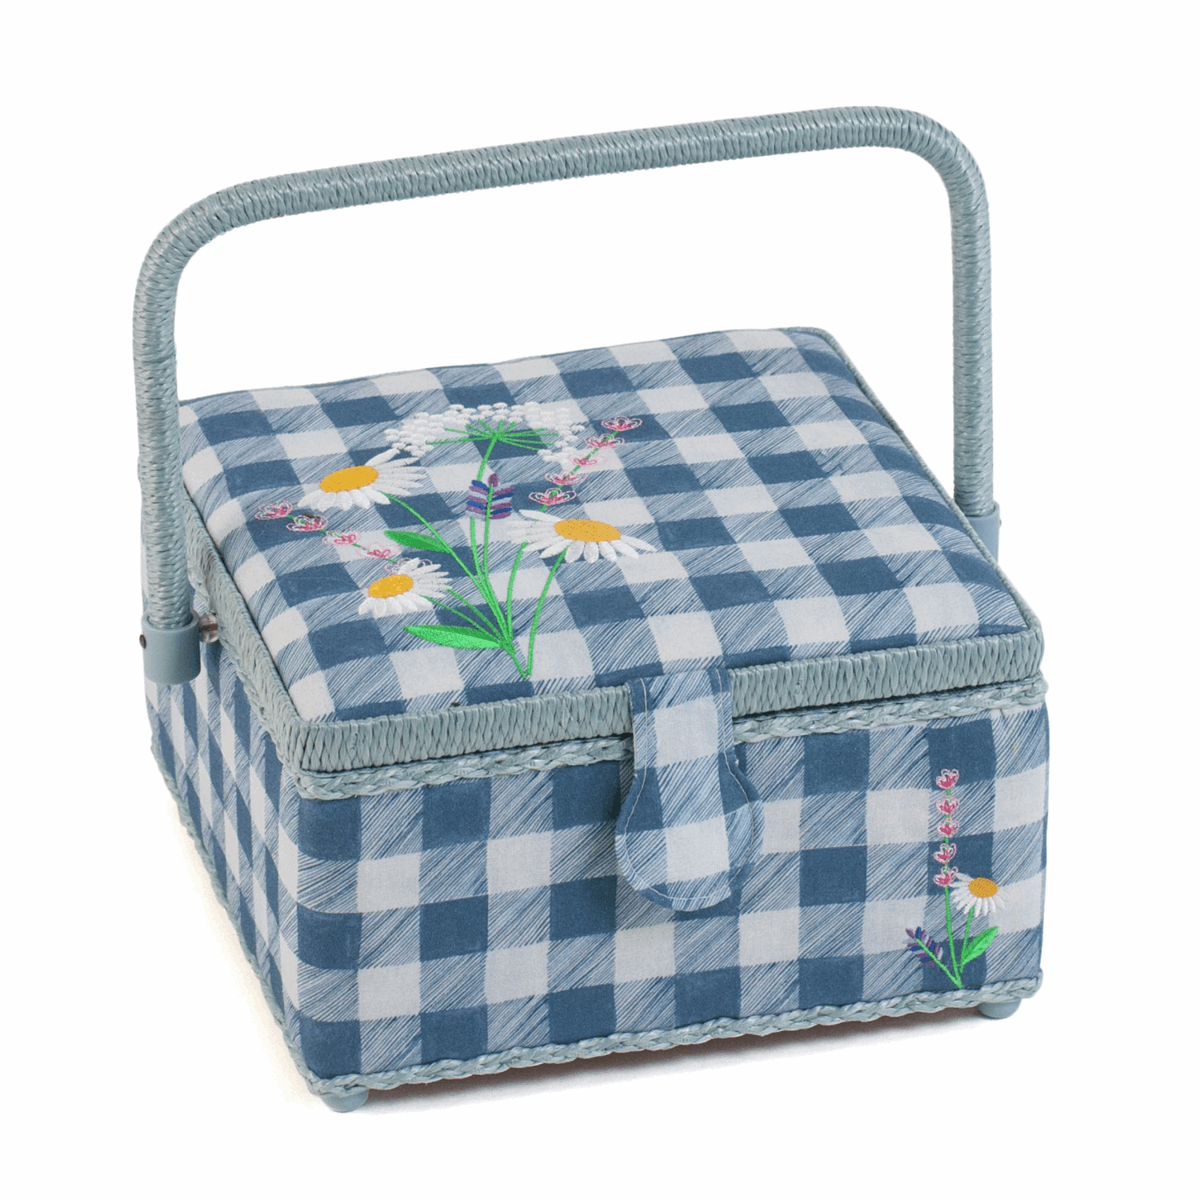 Wild Floral Plaid Square Embroidered Lid Sewing Box - Medium